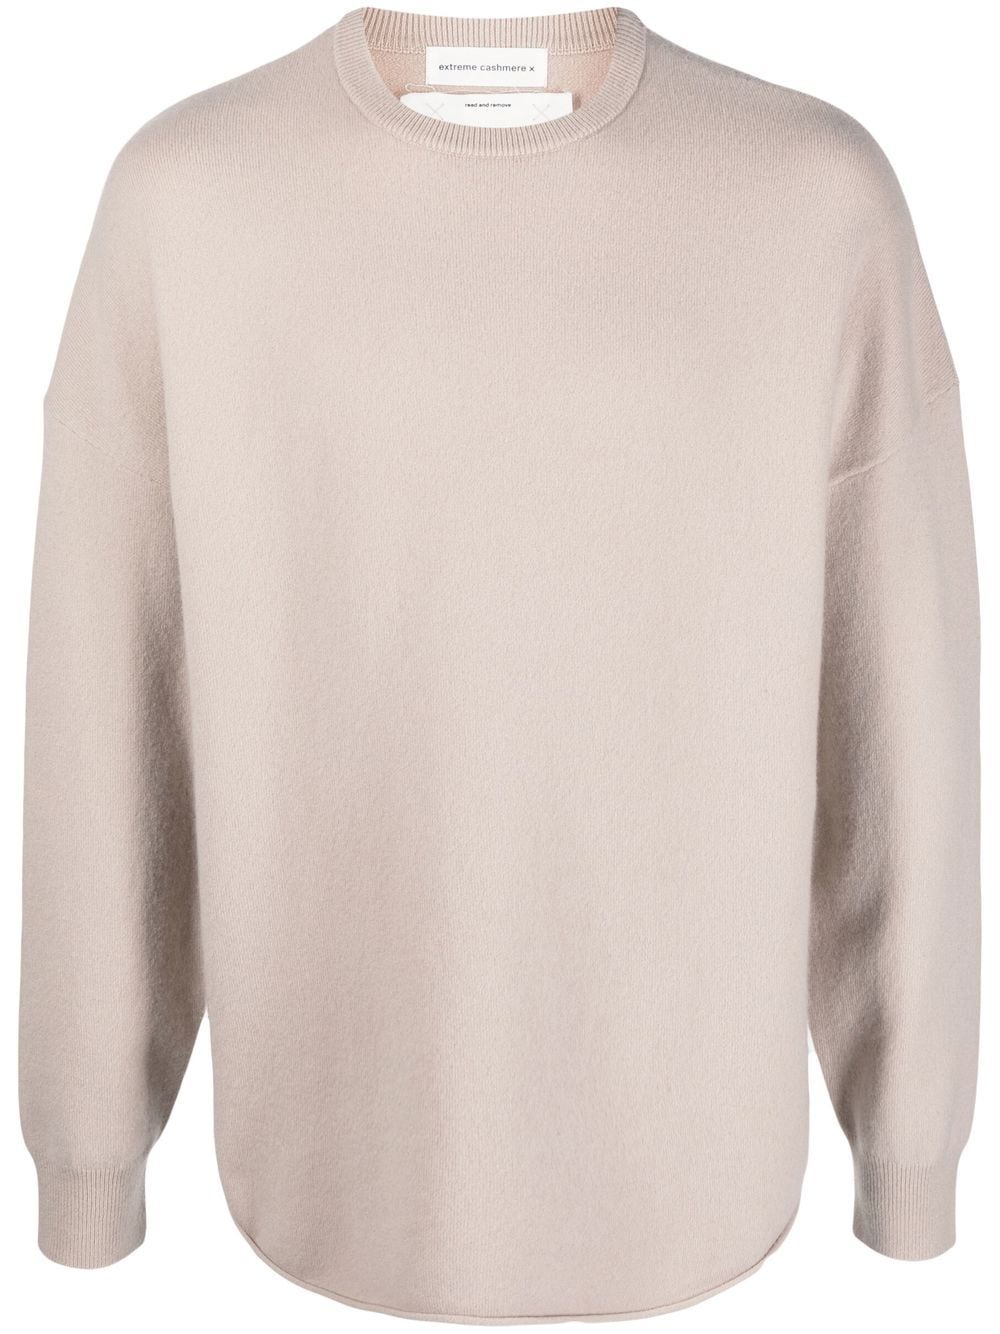 Extreme Cashmere Long-sleeve Cashmere Top In Nude